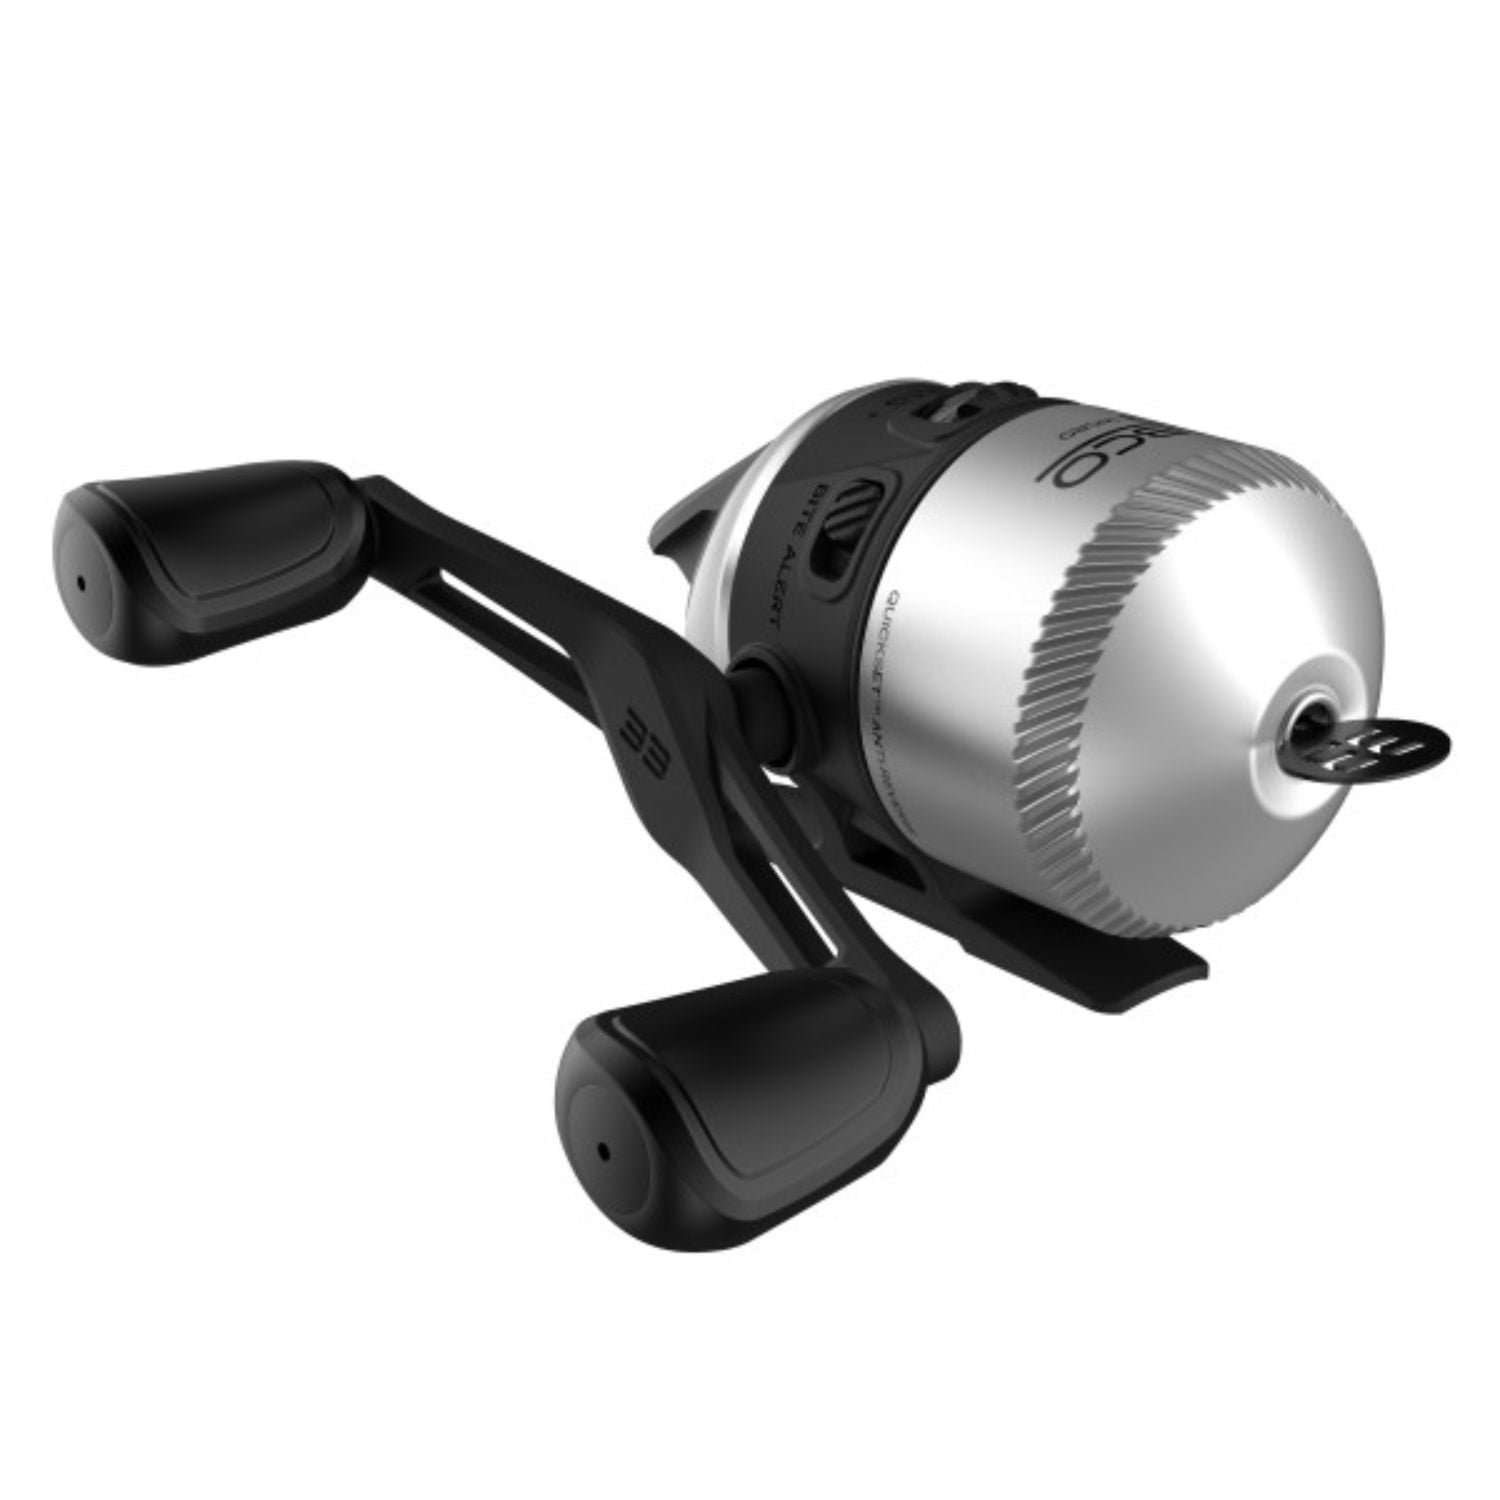 Details about   T5963 PR ZEBCO 33 SPINCAST FISHING REEL MADE IN THE USA 